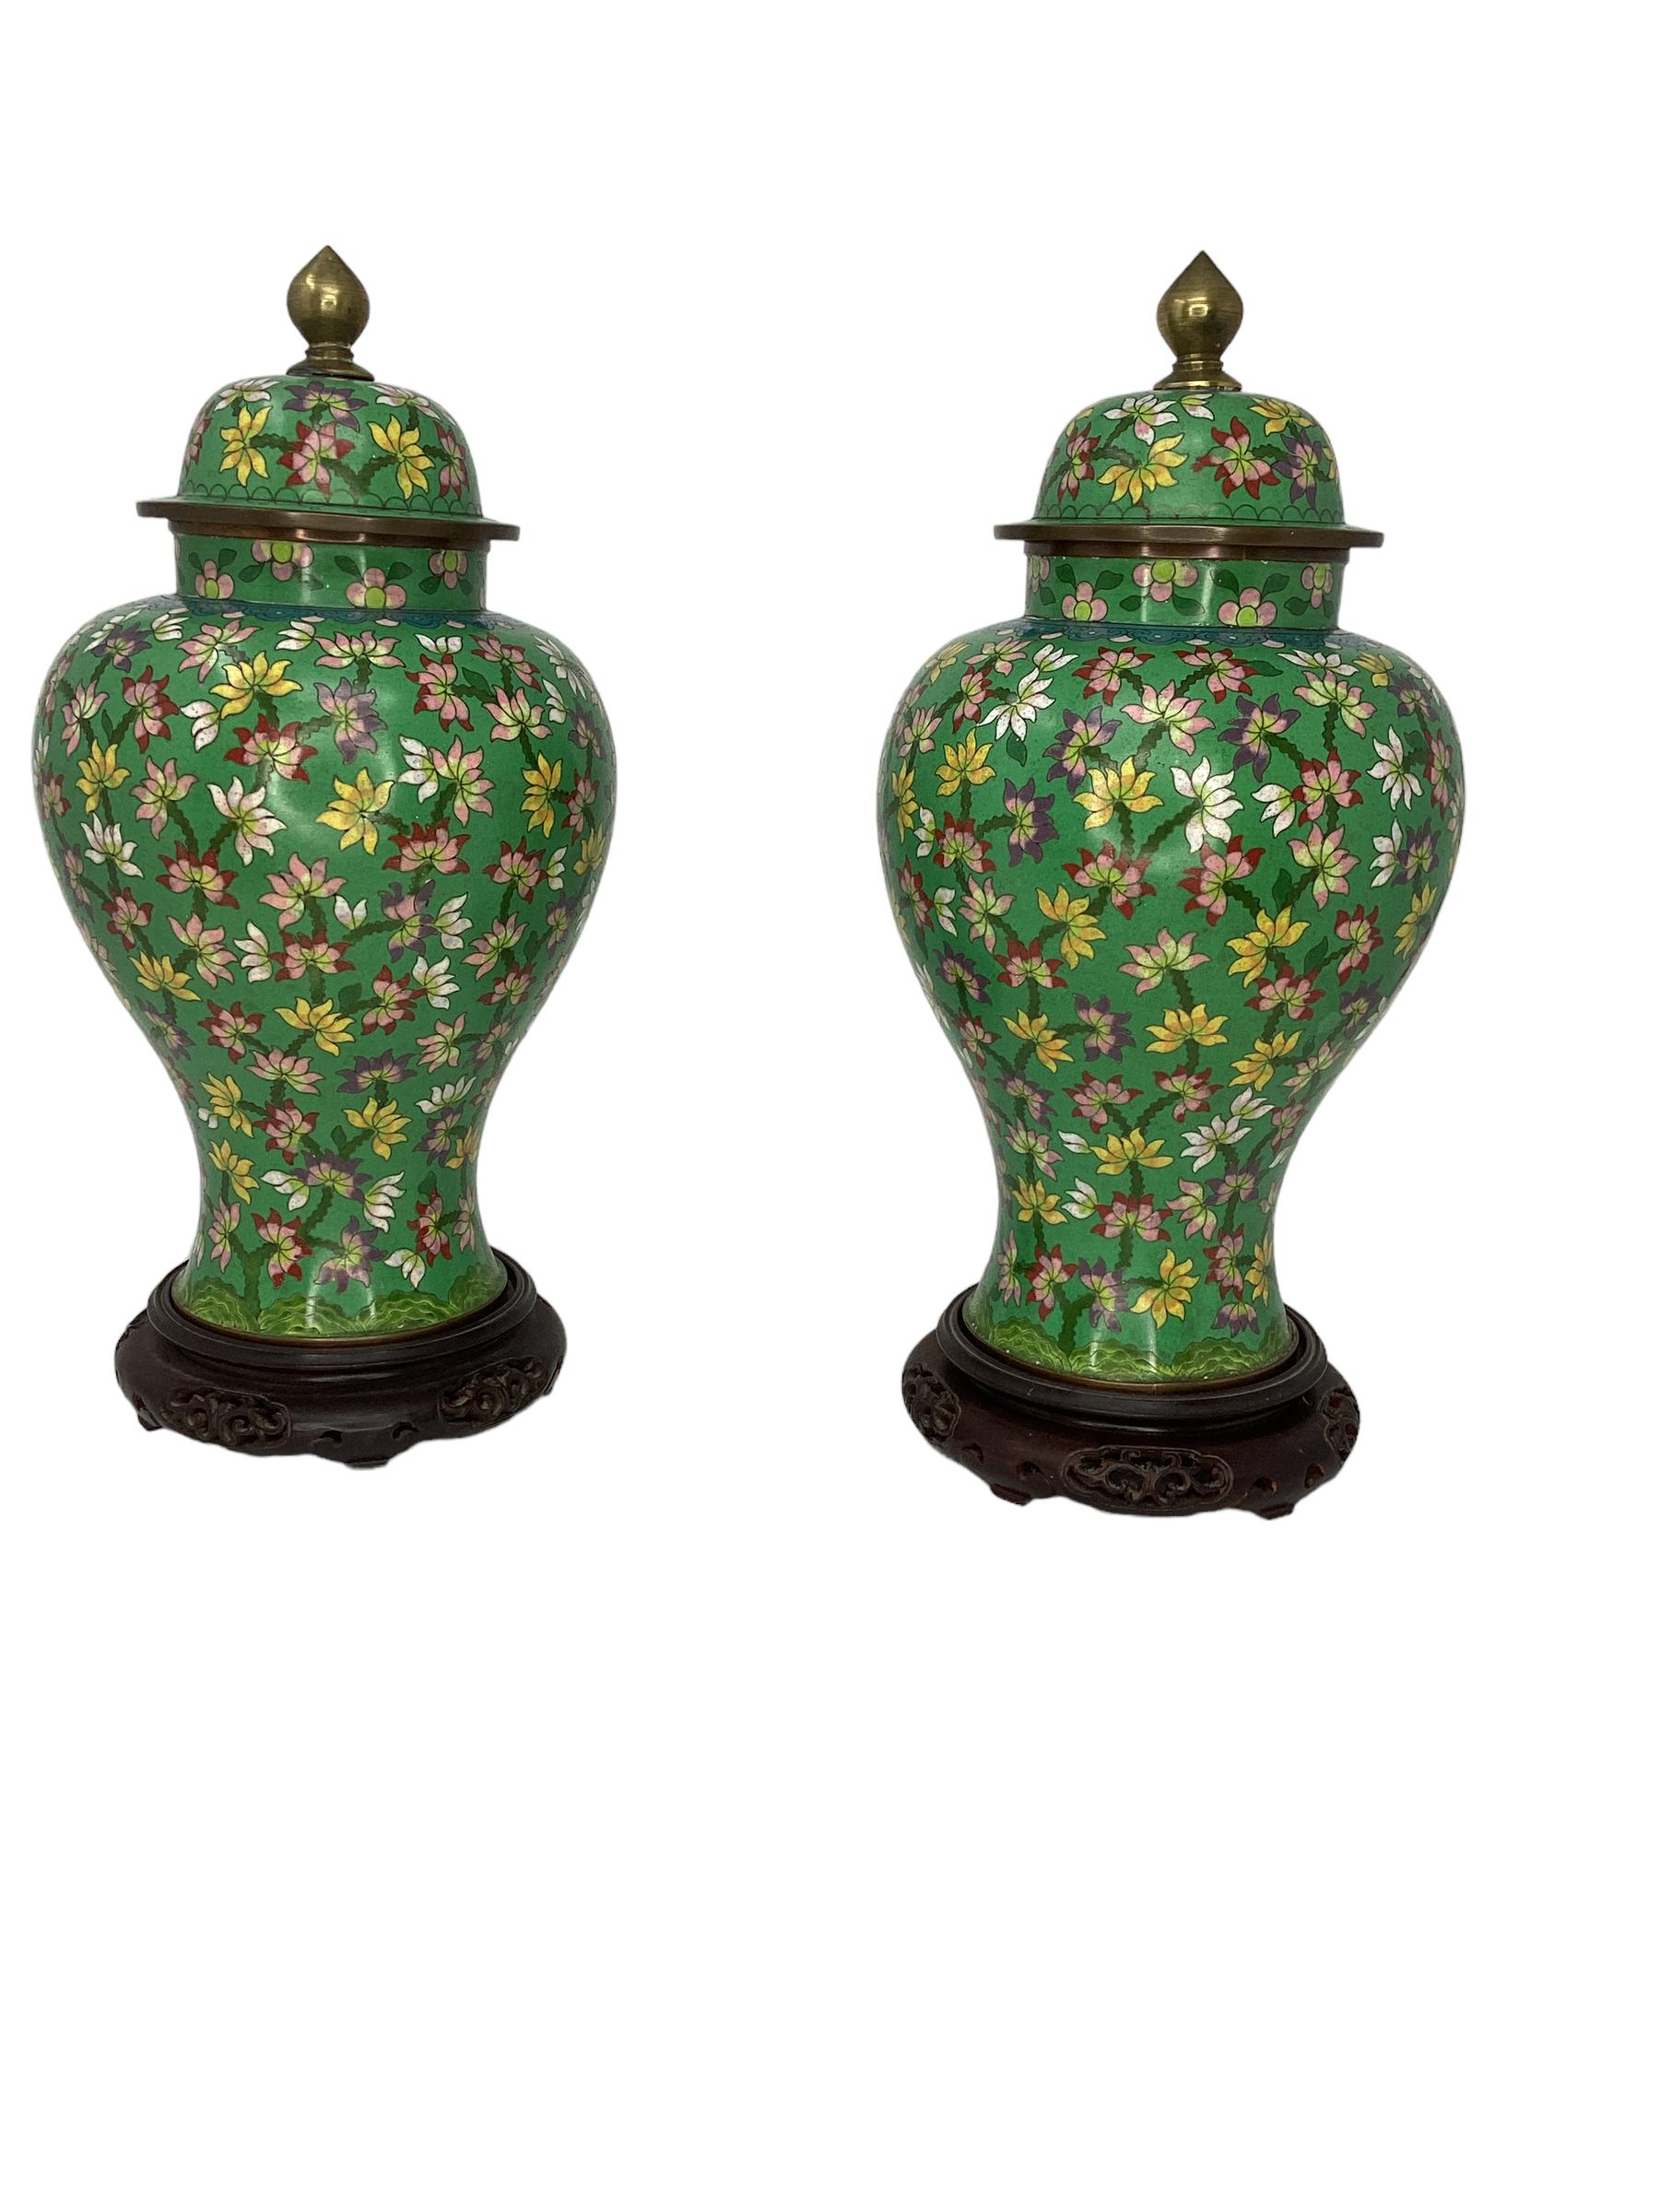 Pair of Antique Chinese Cloisonné Covered Ginger Jar Vases. Each with colorful floral decoration. The covers both have an acorn shaped bronze finials. Both on original carved hardwood bases. Stamped on the underside 